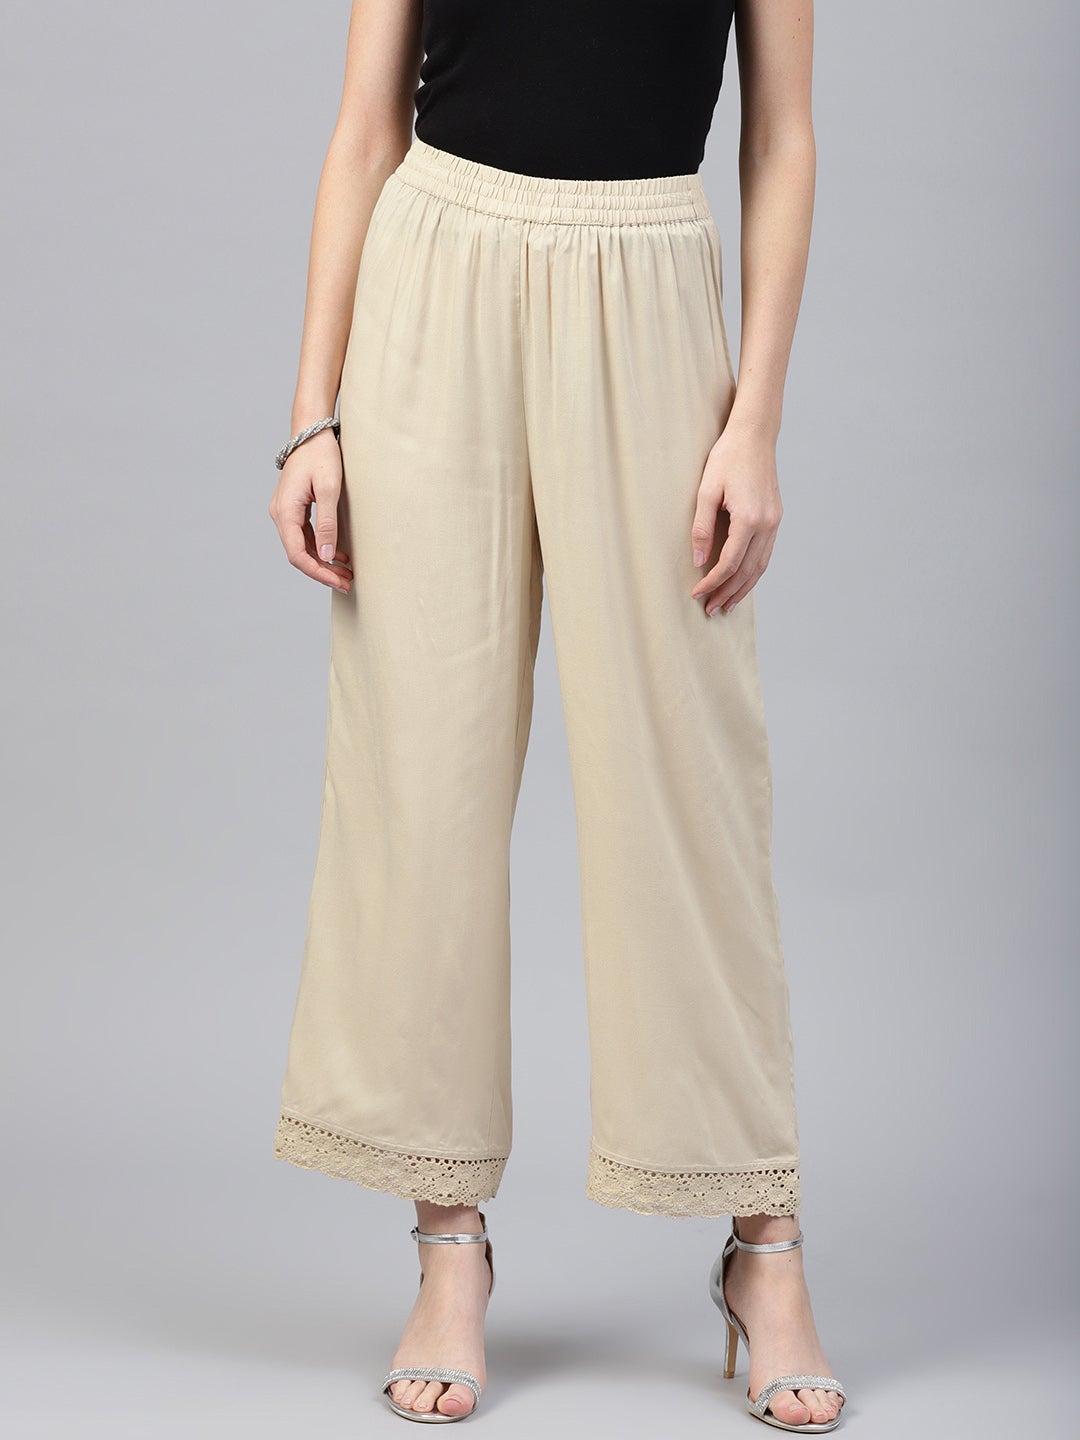 Juniper Beige Solid Rayon Wide Leg Women Palazzo With One Pocket